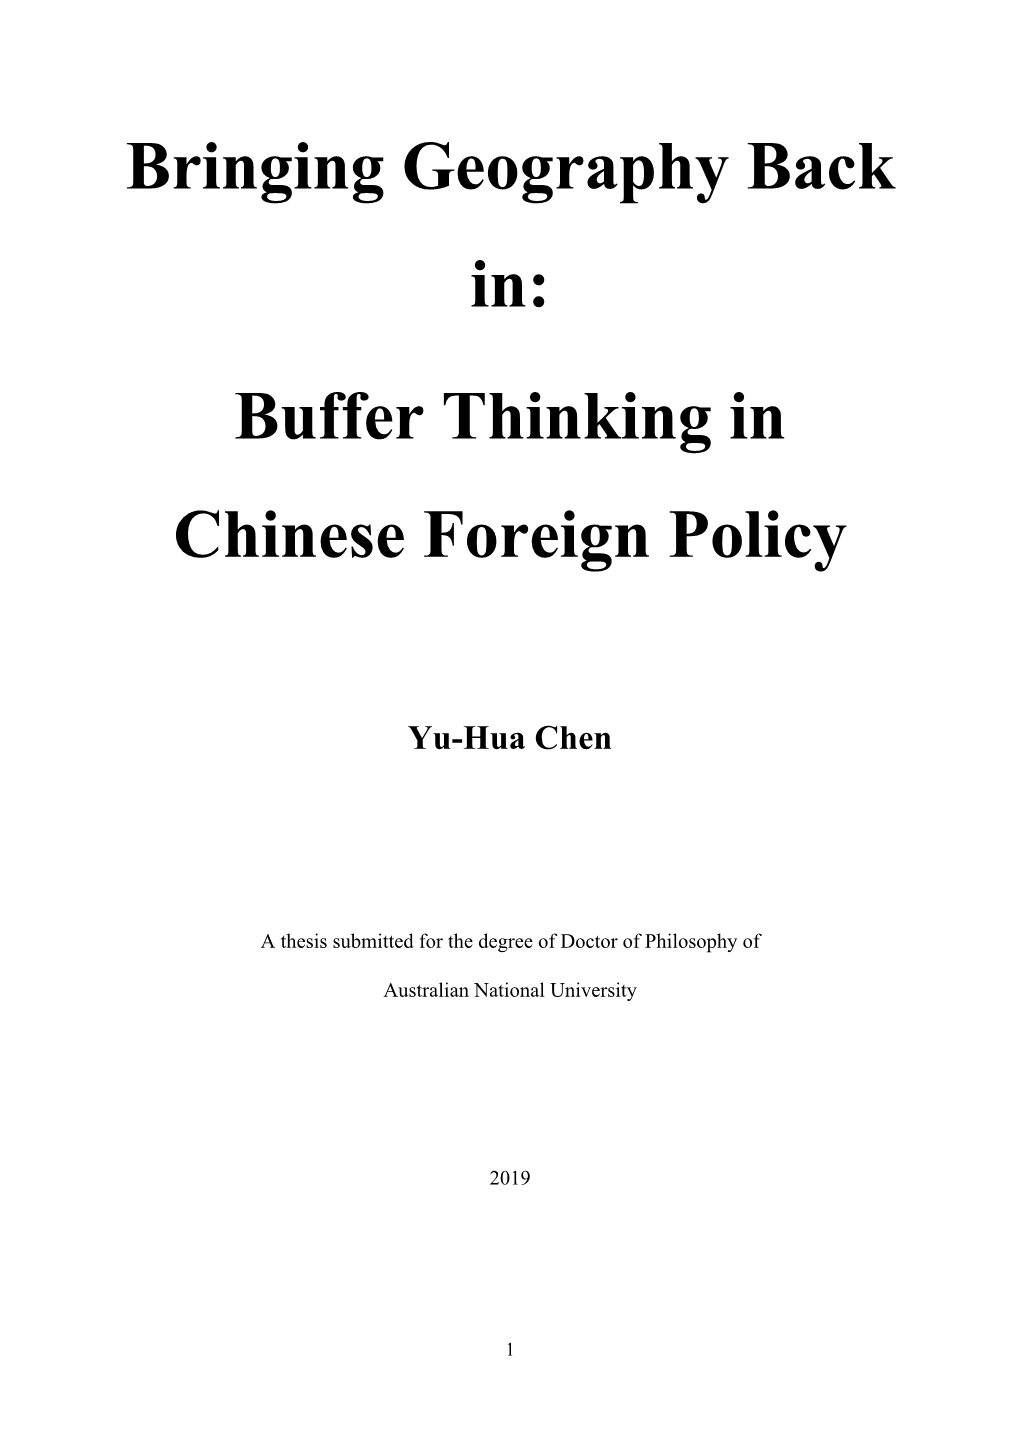 Bringing Geography Back In: Buffer Thinking in Chinese Foreign Policy